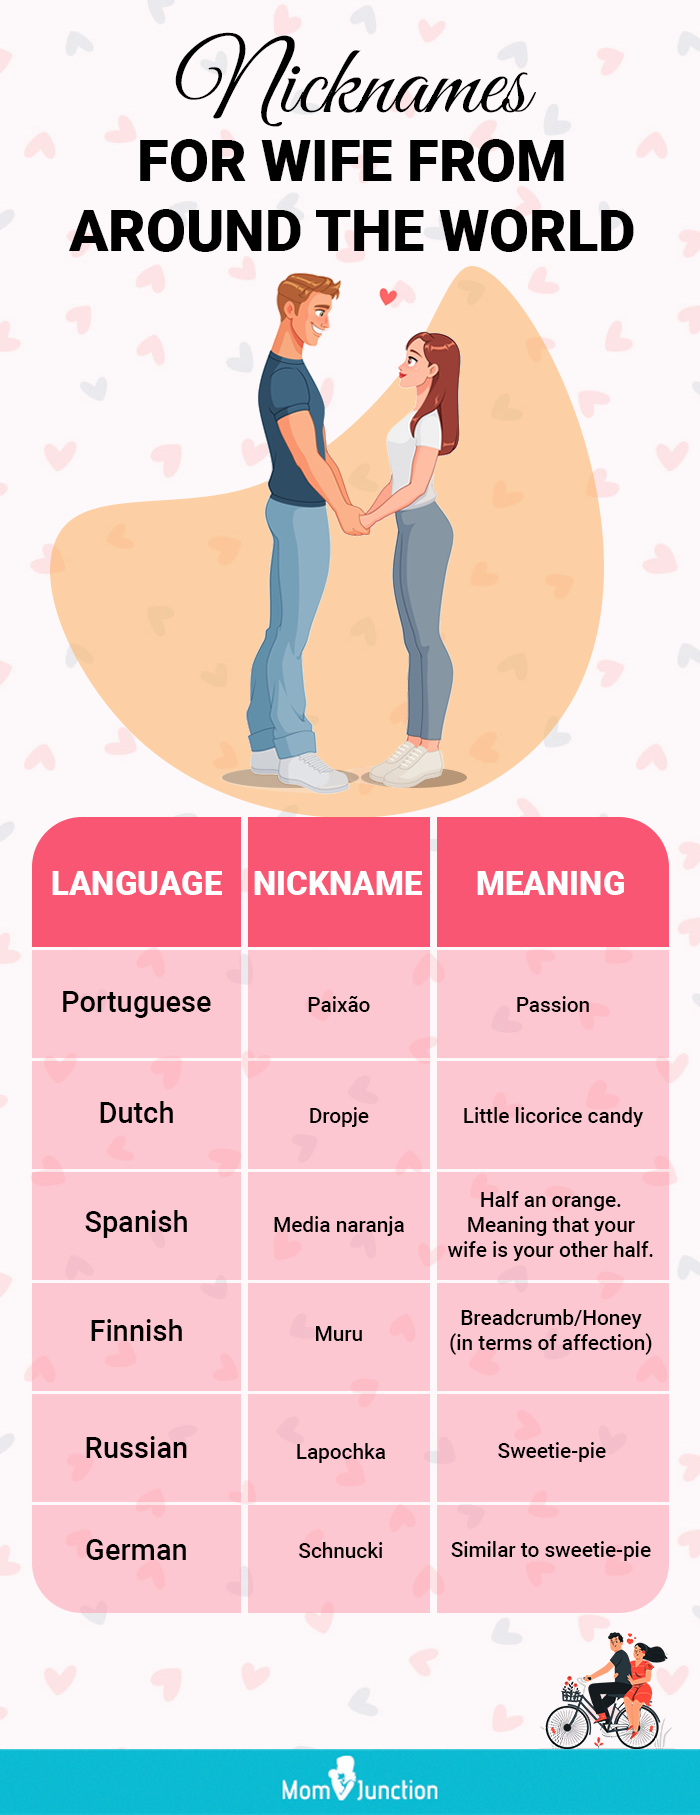 Nicknames For Wife From Around The World 